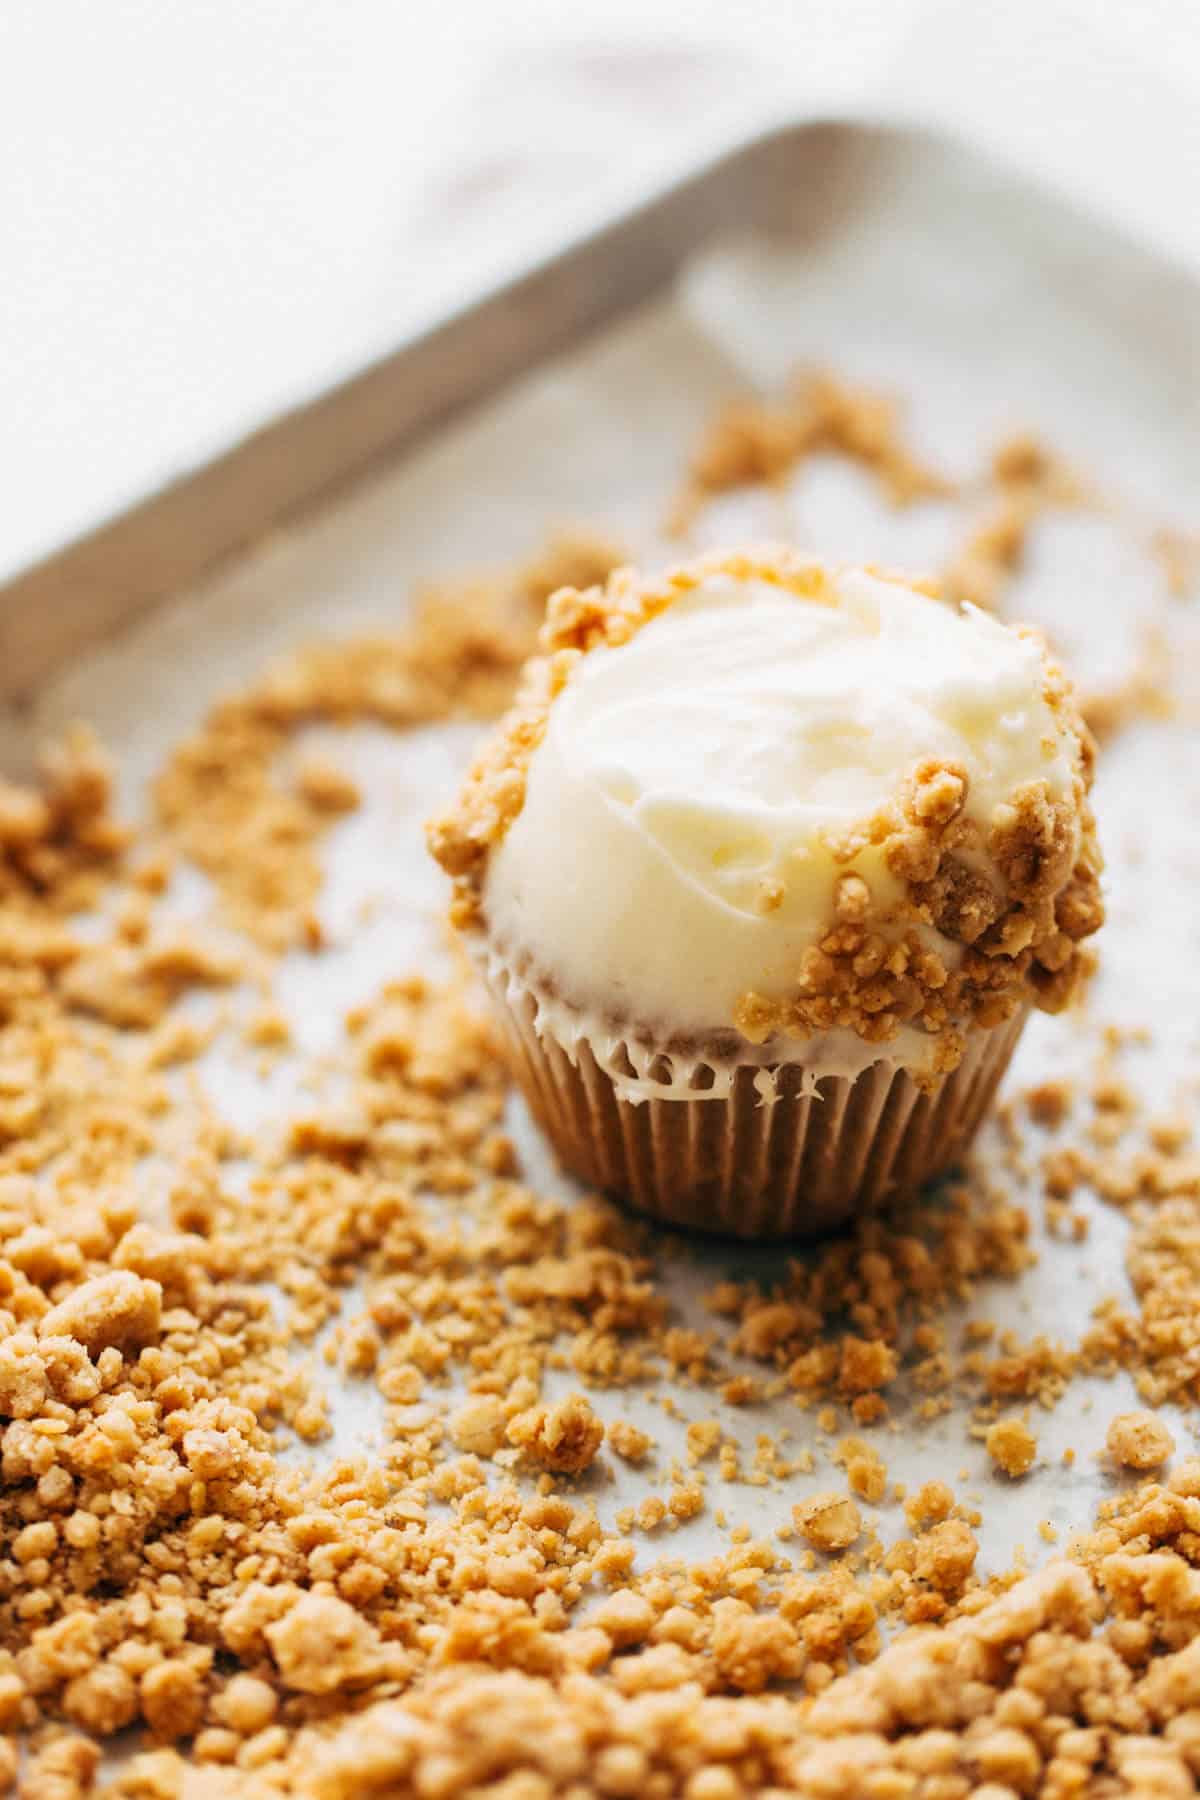 a cupcake on a tray of oat crumble with the frosting half coated in crumble